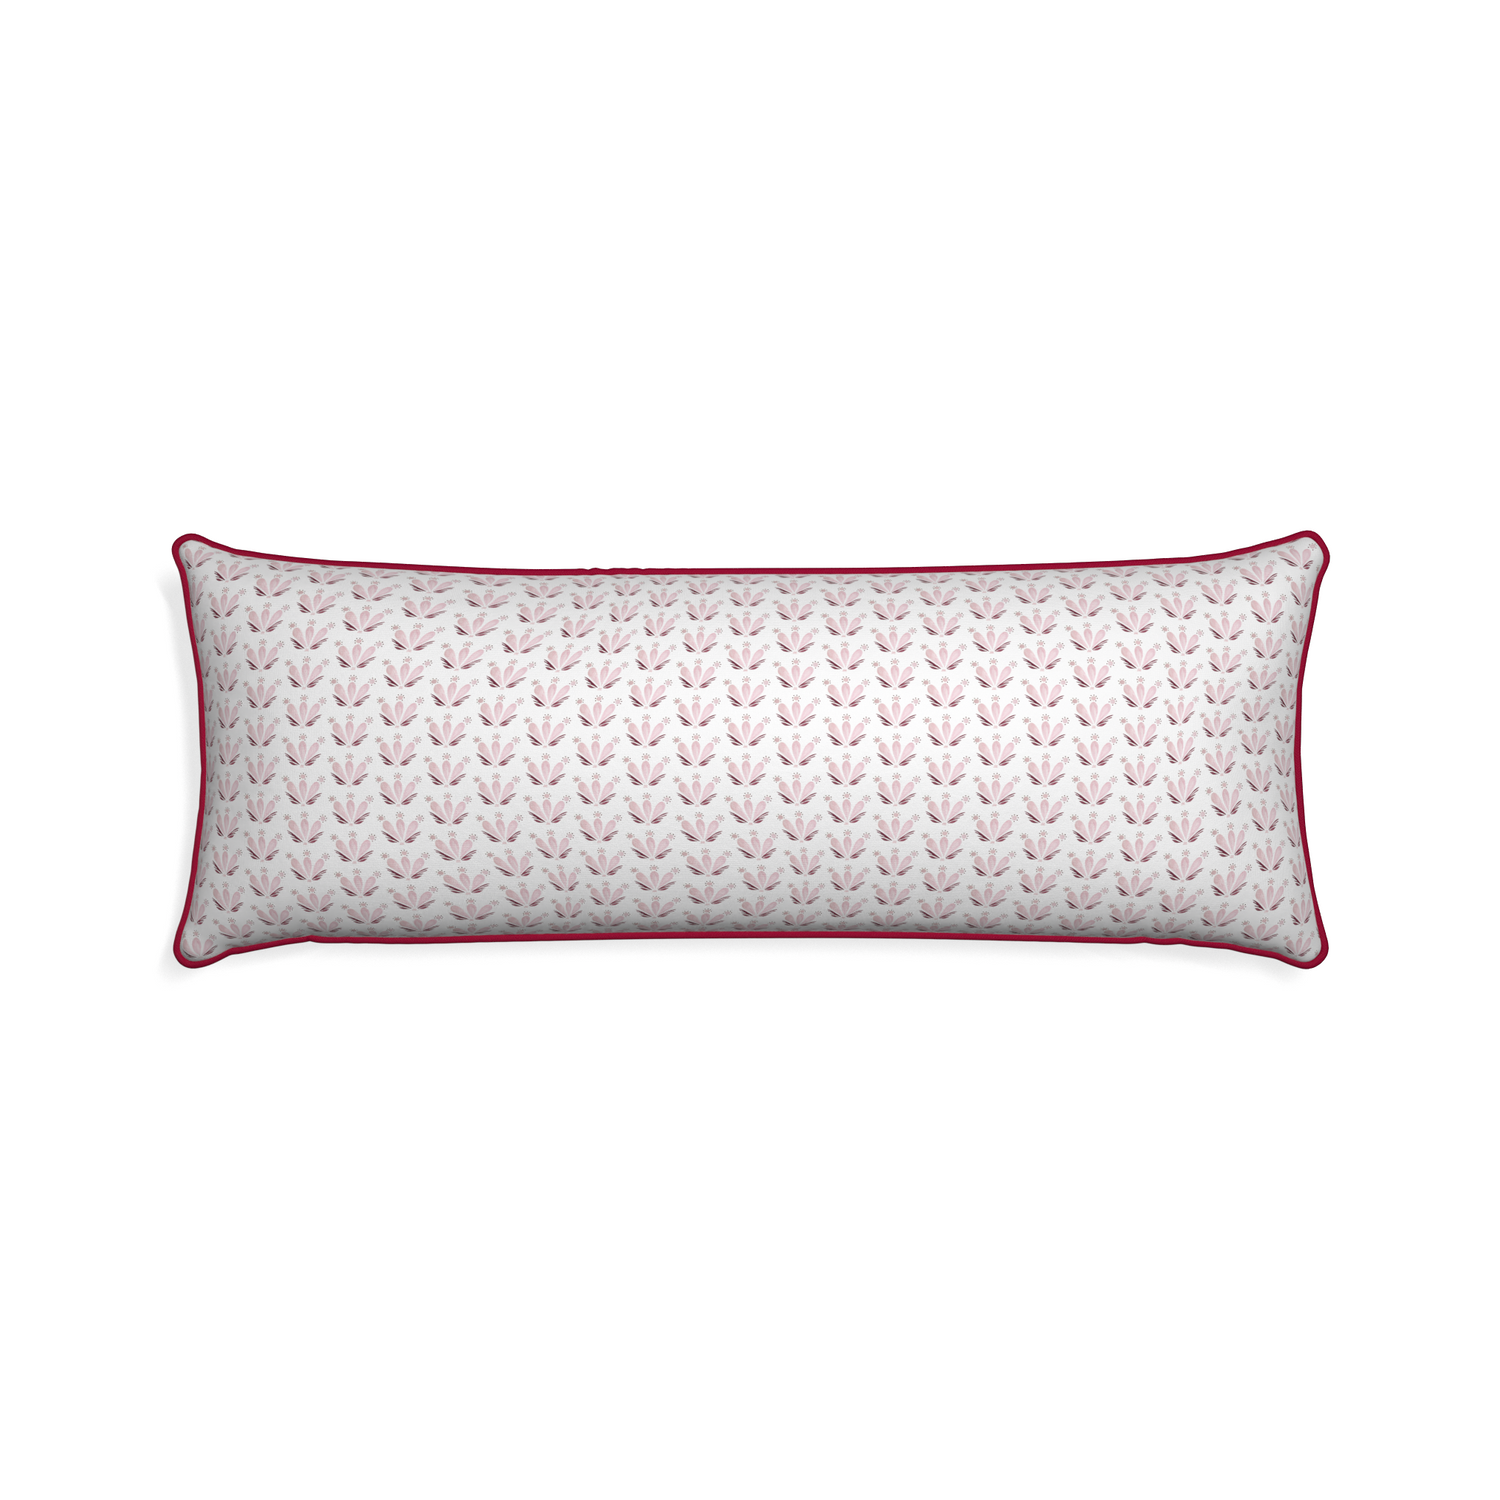 Xl-lumbar serena pink custom pillow with raspberry piping on white background